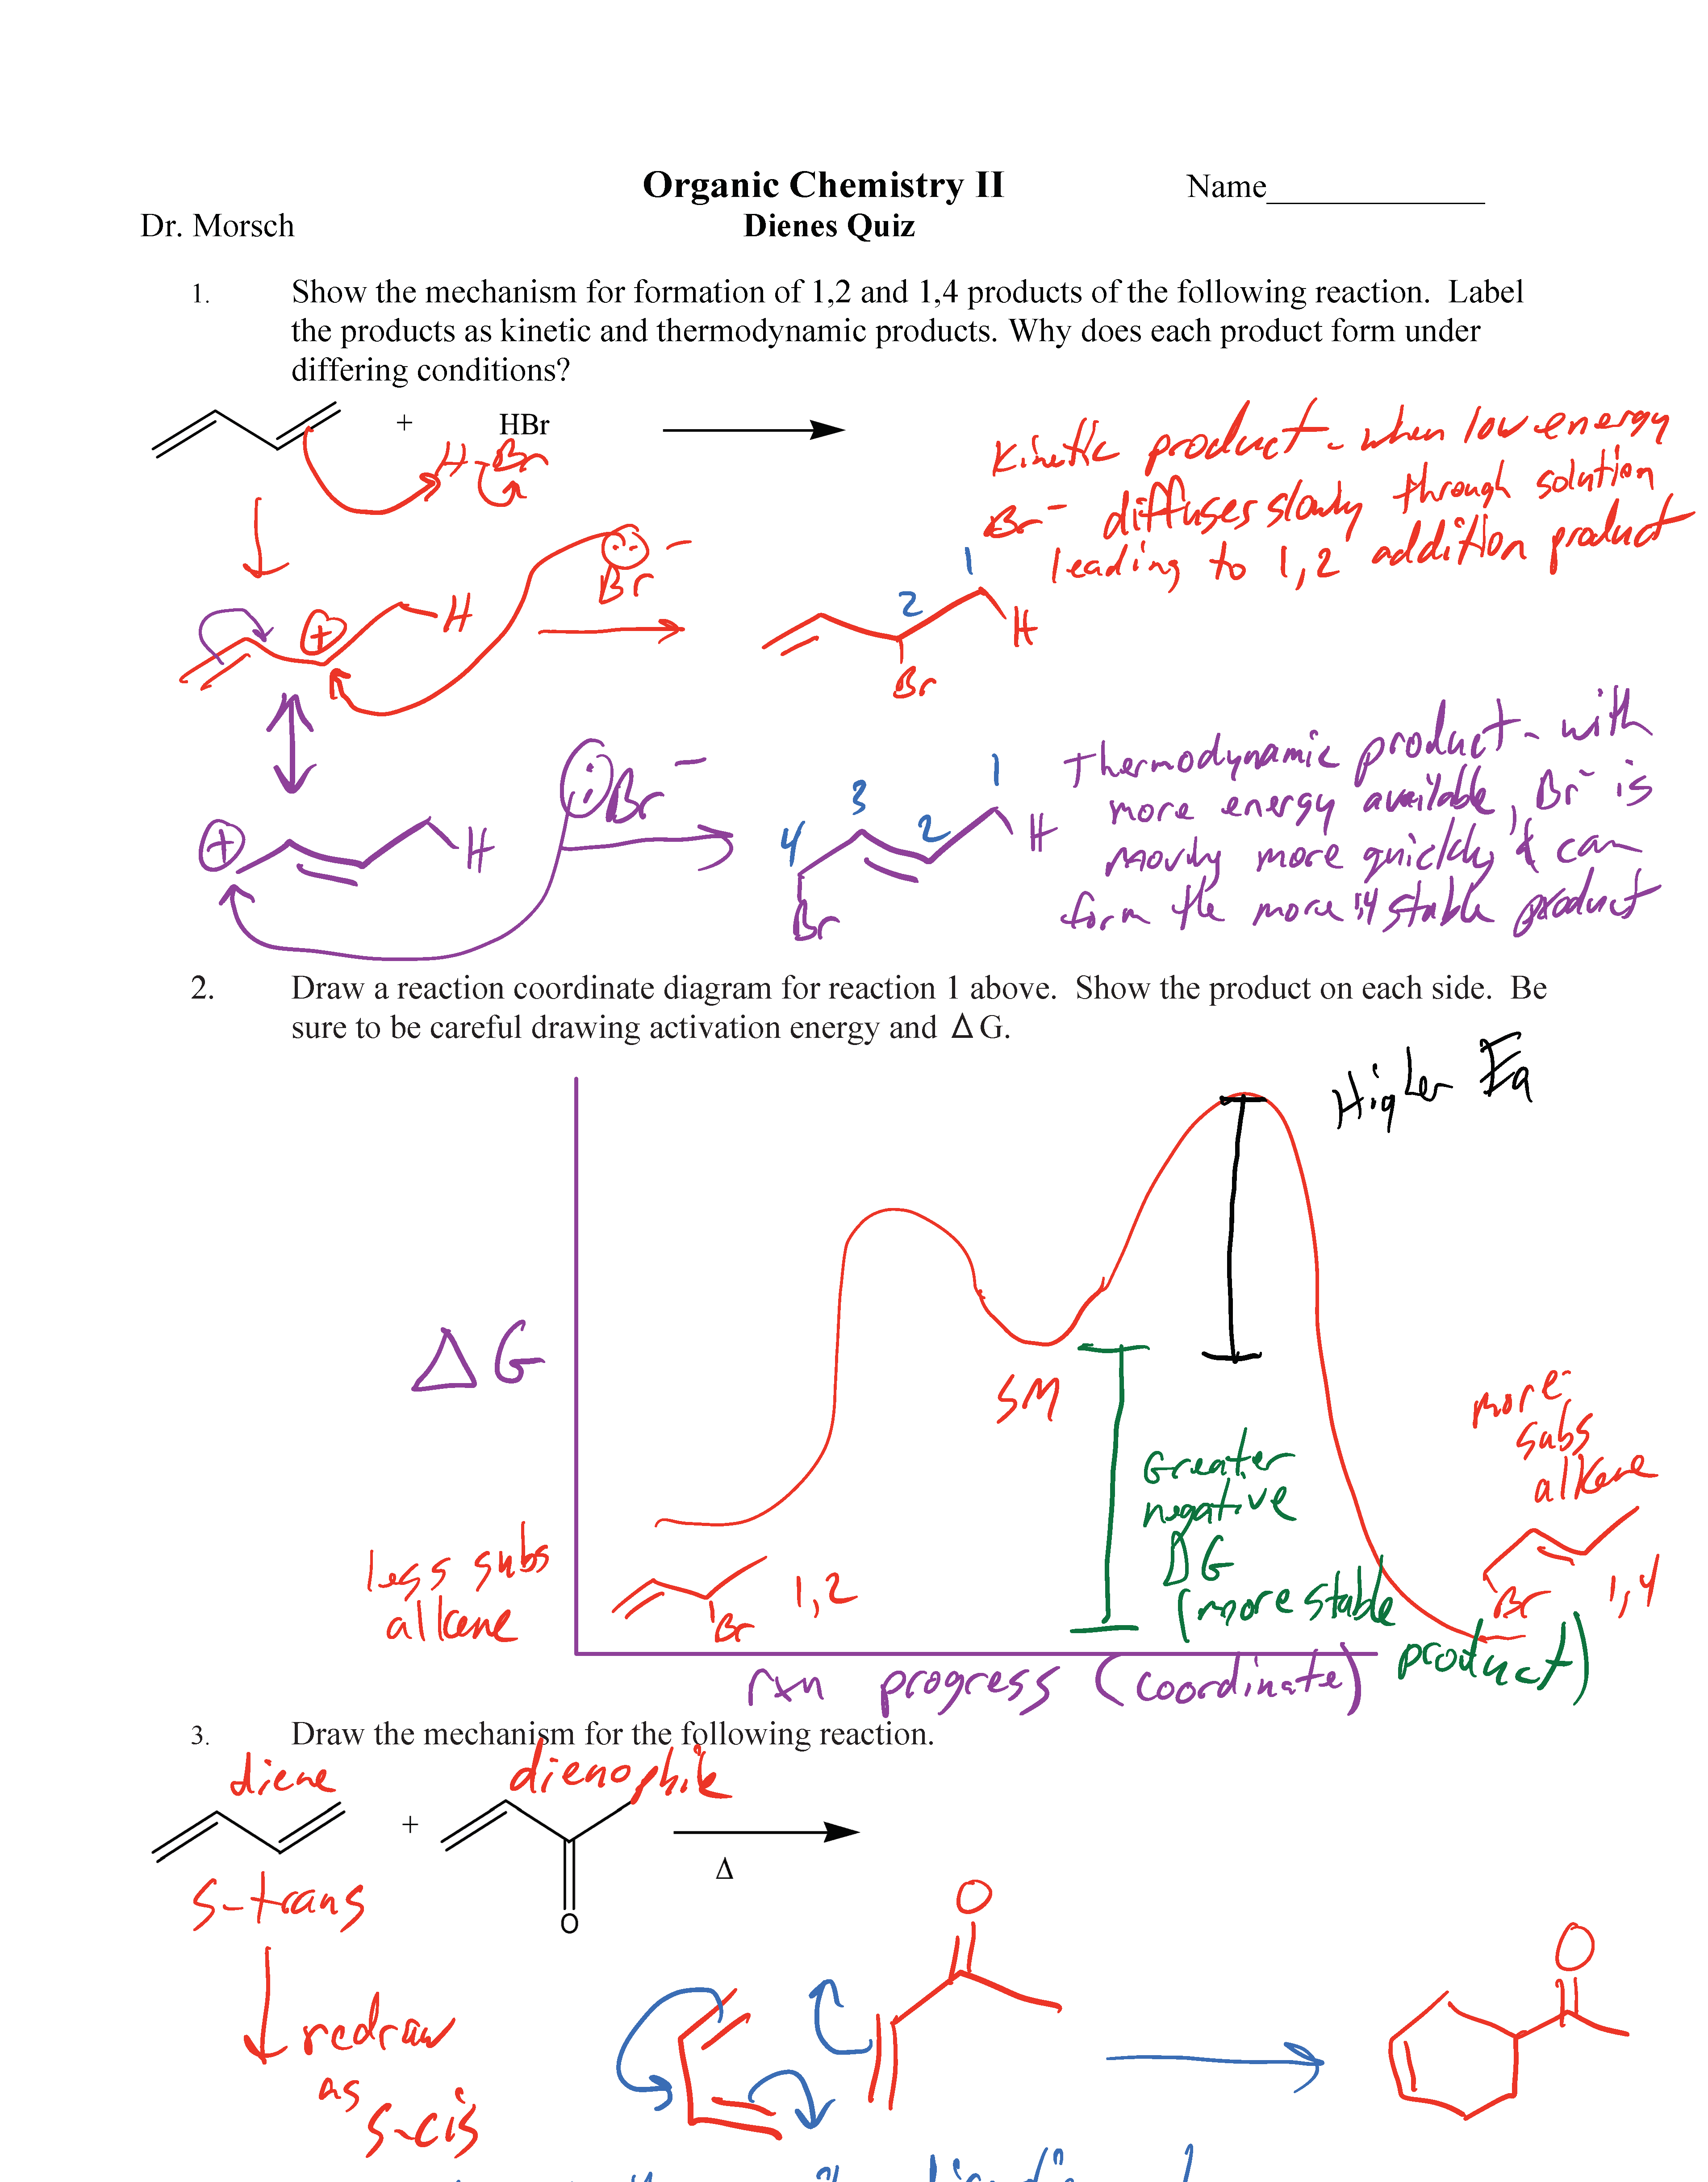 Org Chem 2 Dienes quiz answers_Page_1.png